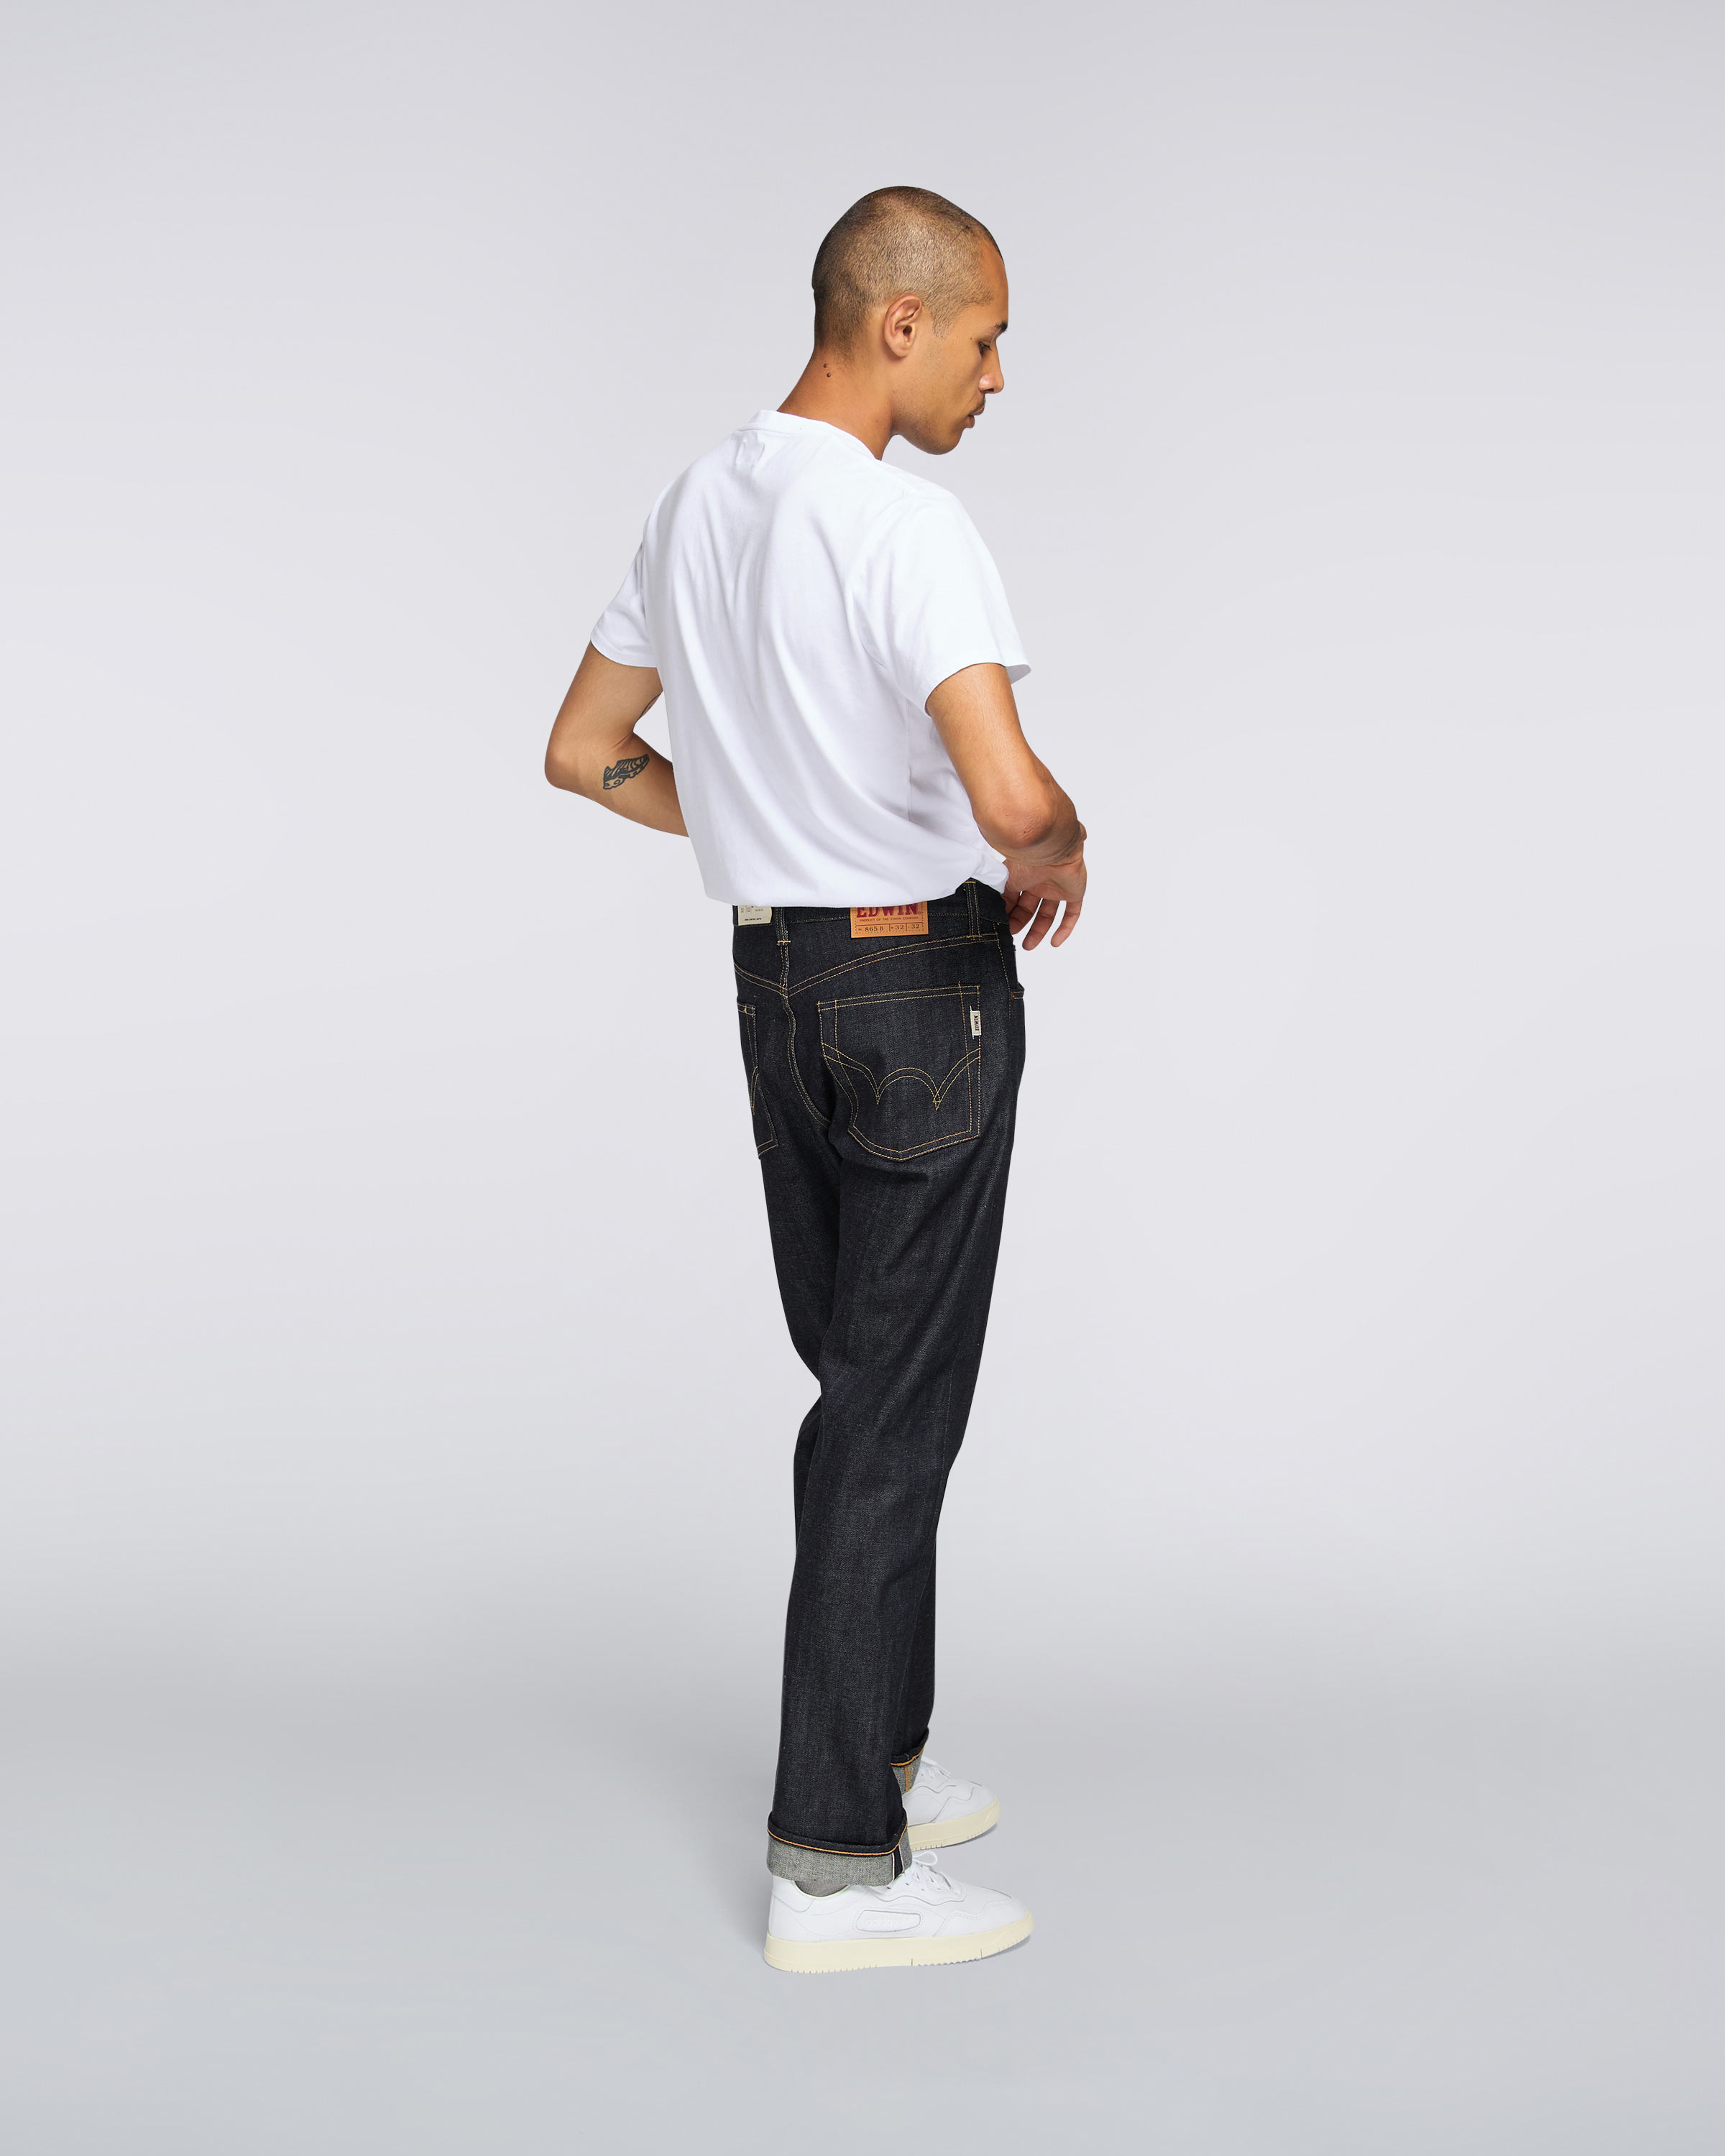 edwin nashville red selvage jeans